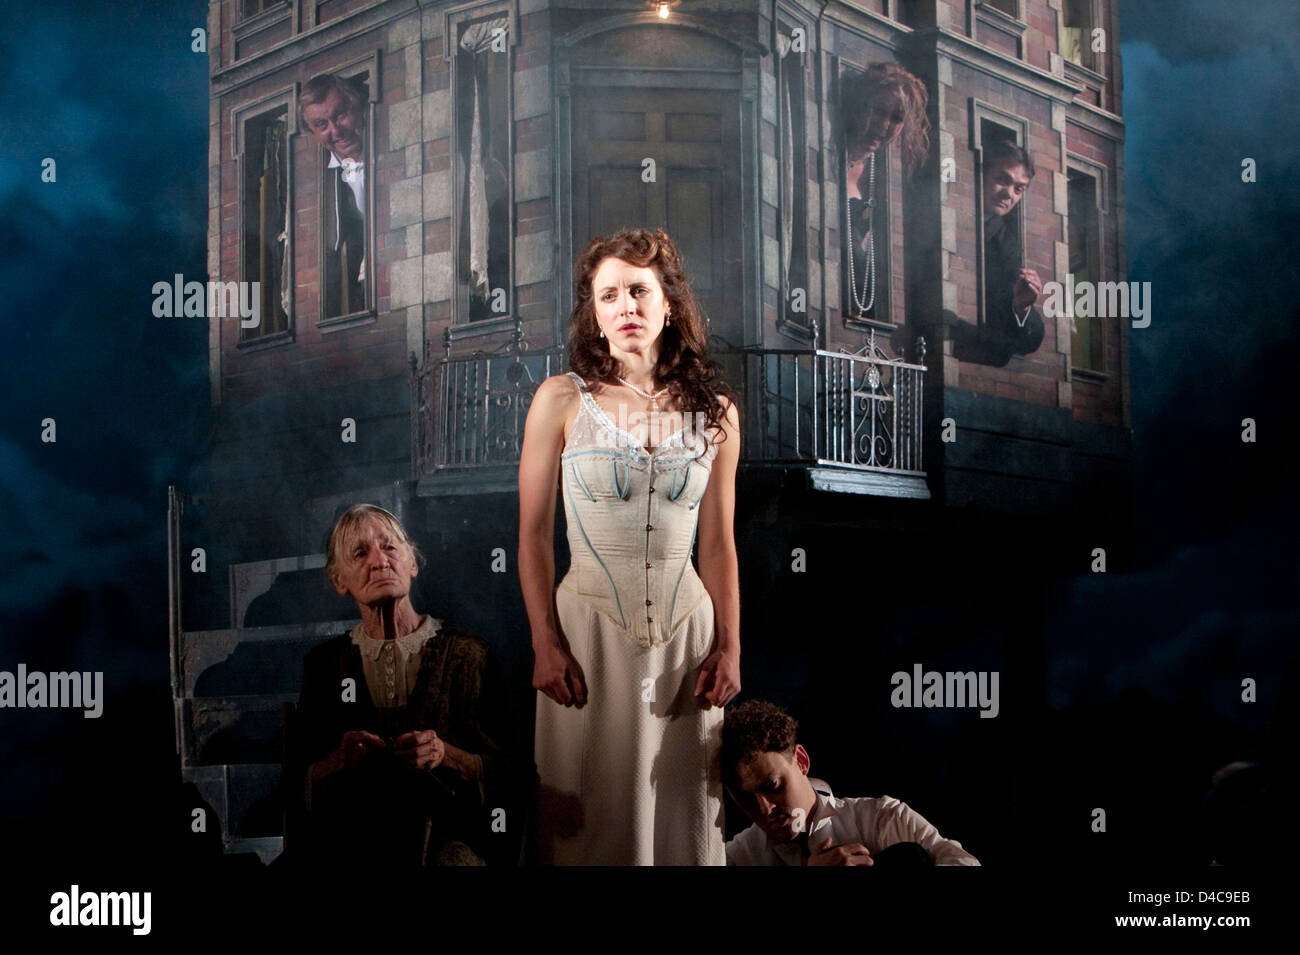 Diana Payne-Myers (Edna), Marianne Oldham (Sheila Birling), Robin Whiting (Eric Birling) in AN INSPECTOR CALLS by J B Priestley at the Novello Theatre, London WC2 25/09/2009 a National Theatre production  design: Ian MacNeil   lighting: Rick Fisher   director: Stephen Daldry Stock Photo